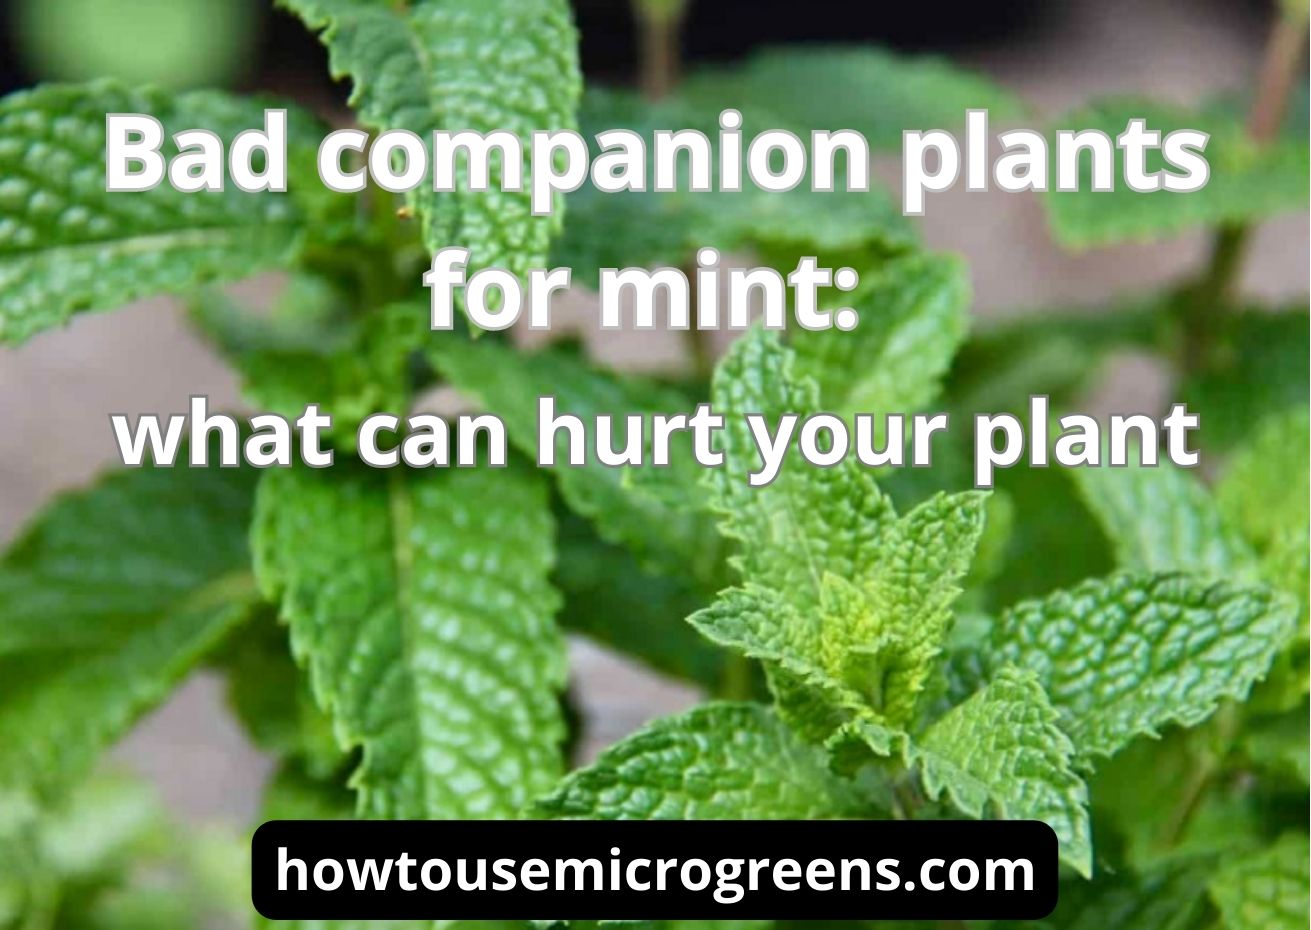 21 bad companion plants for mint: the best and complete guide